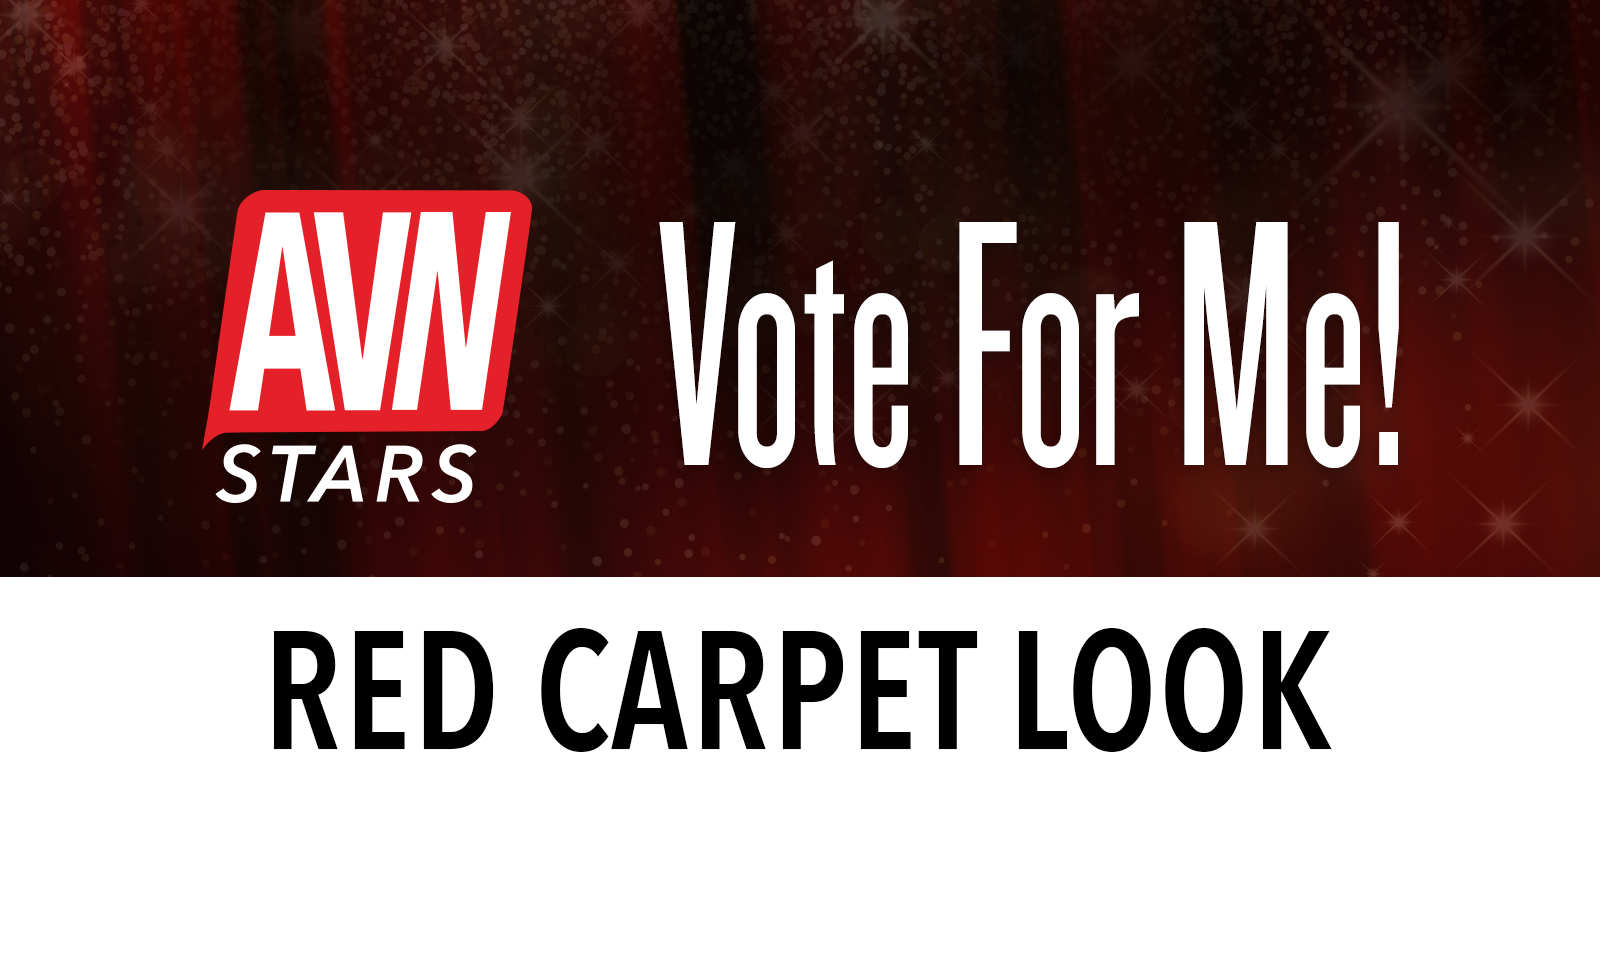 AVN Stars Launches ‘Red Carpet Look Contest’